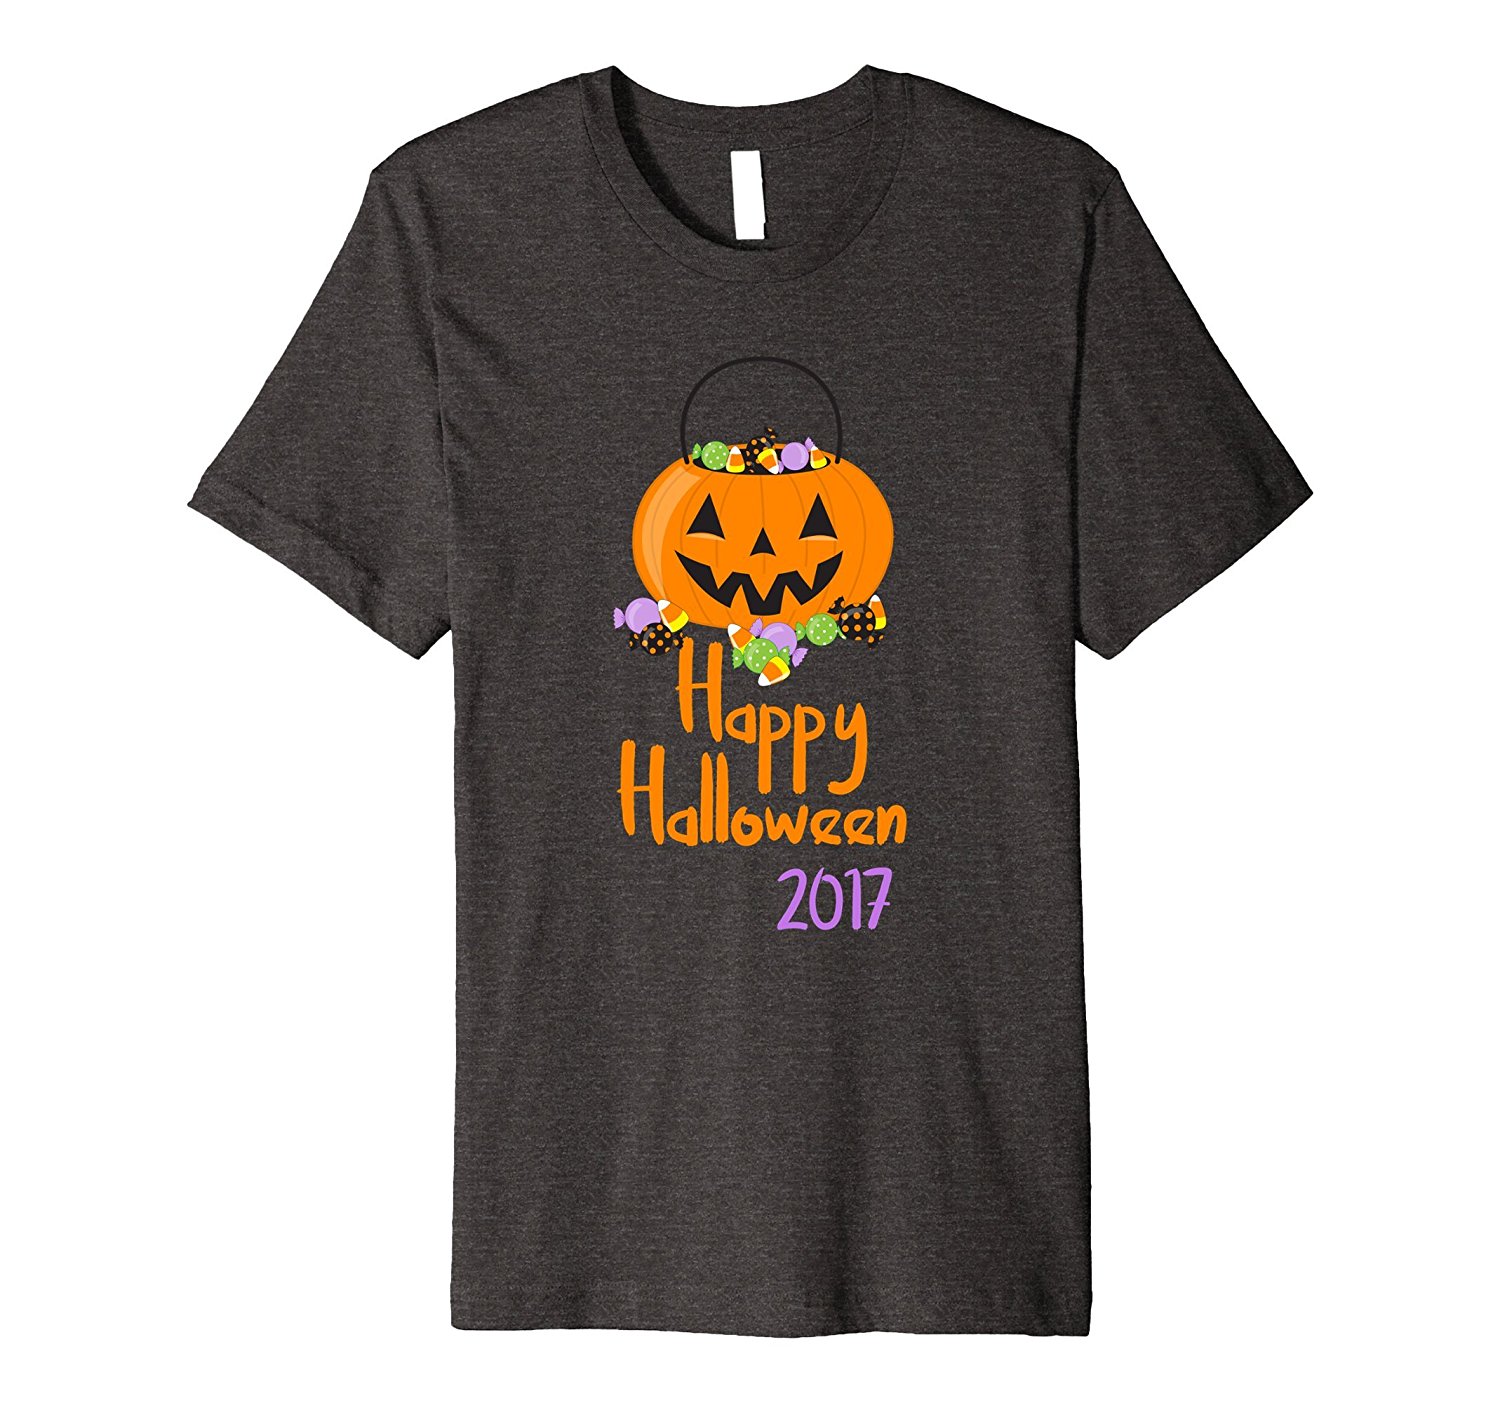 4Craig T-Shirts: 10 Fun and Spooky Halloween and Fall Tees